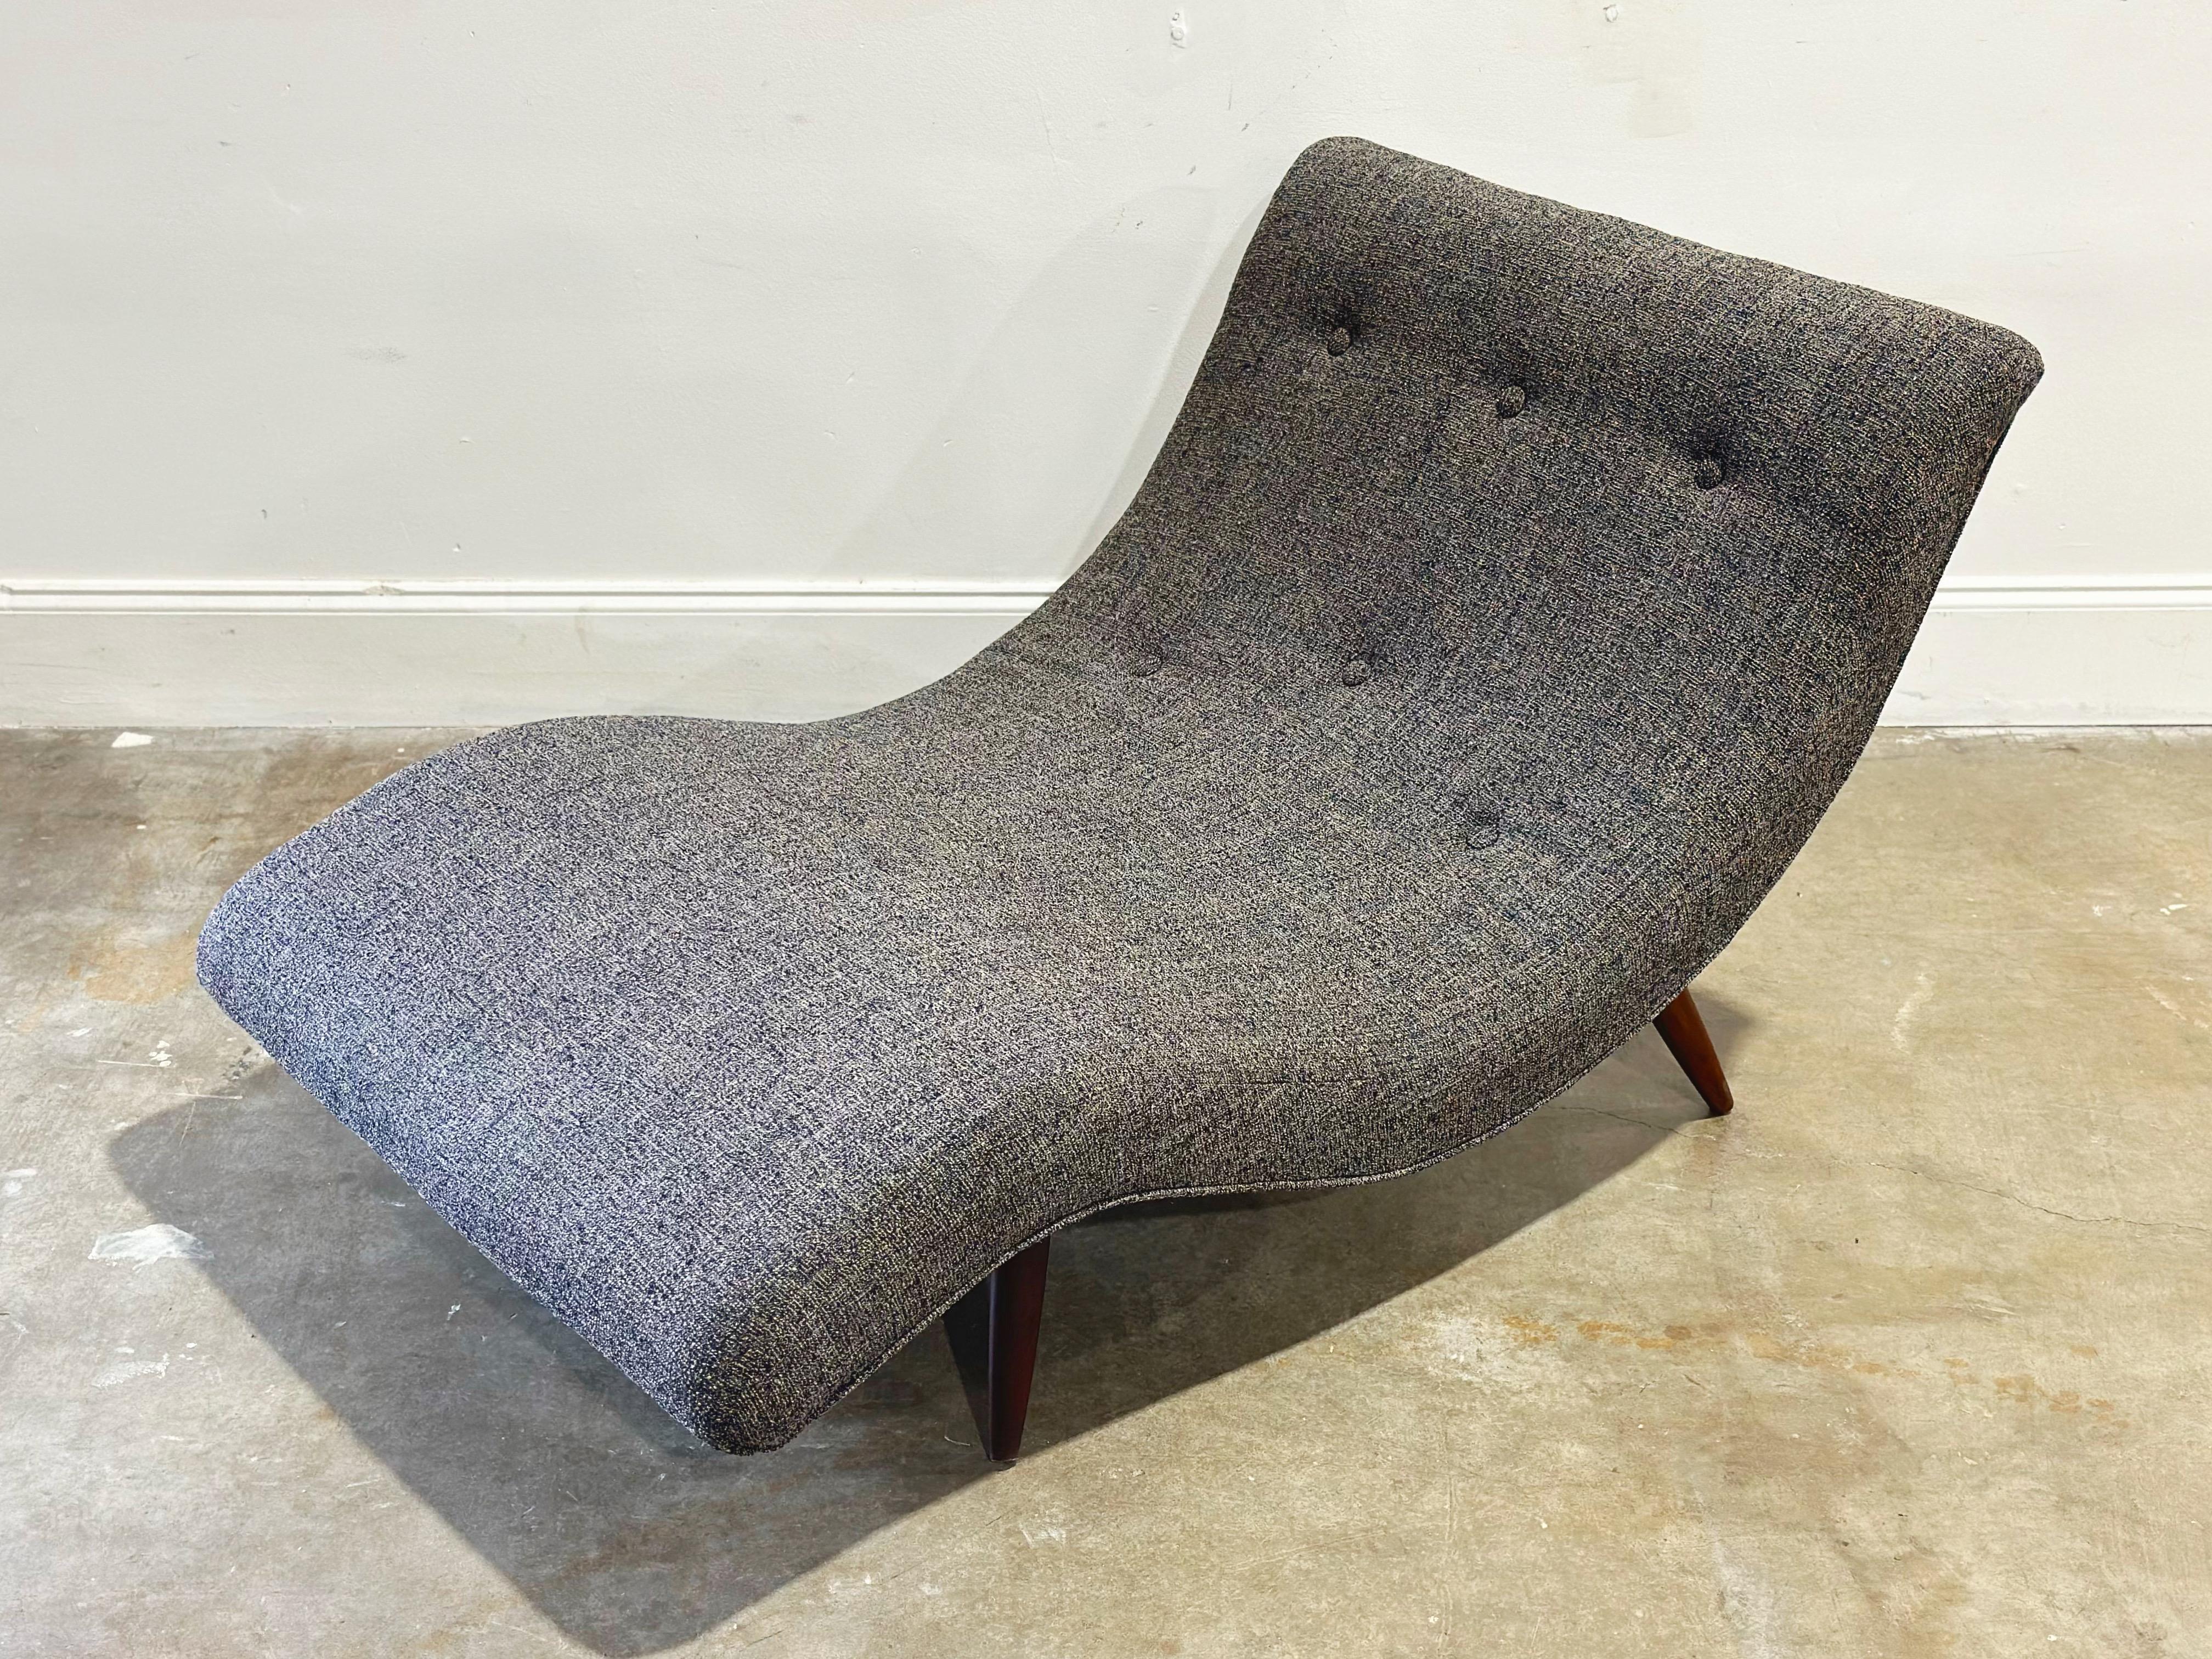 American Midcentury Modern Adrian Pearsall Wave Chaise Lounge - Modernist Lounge Chair